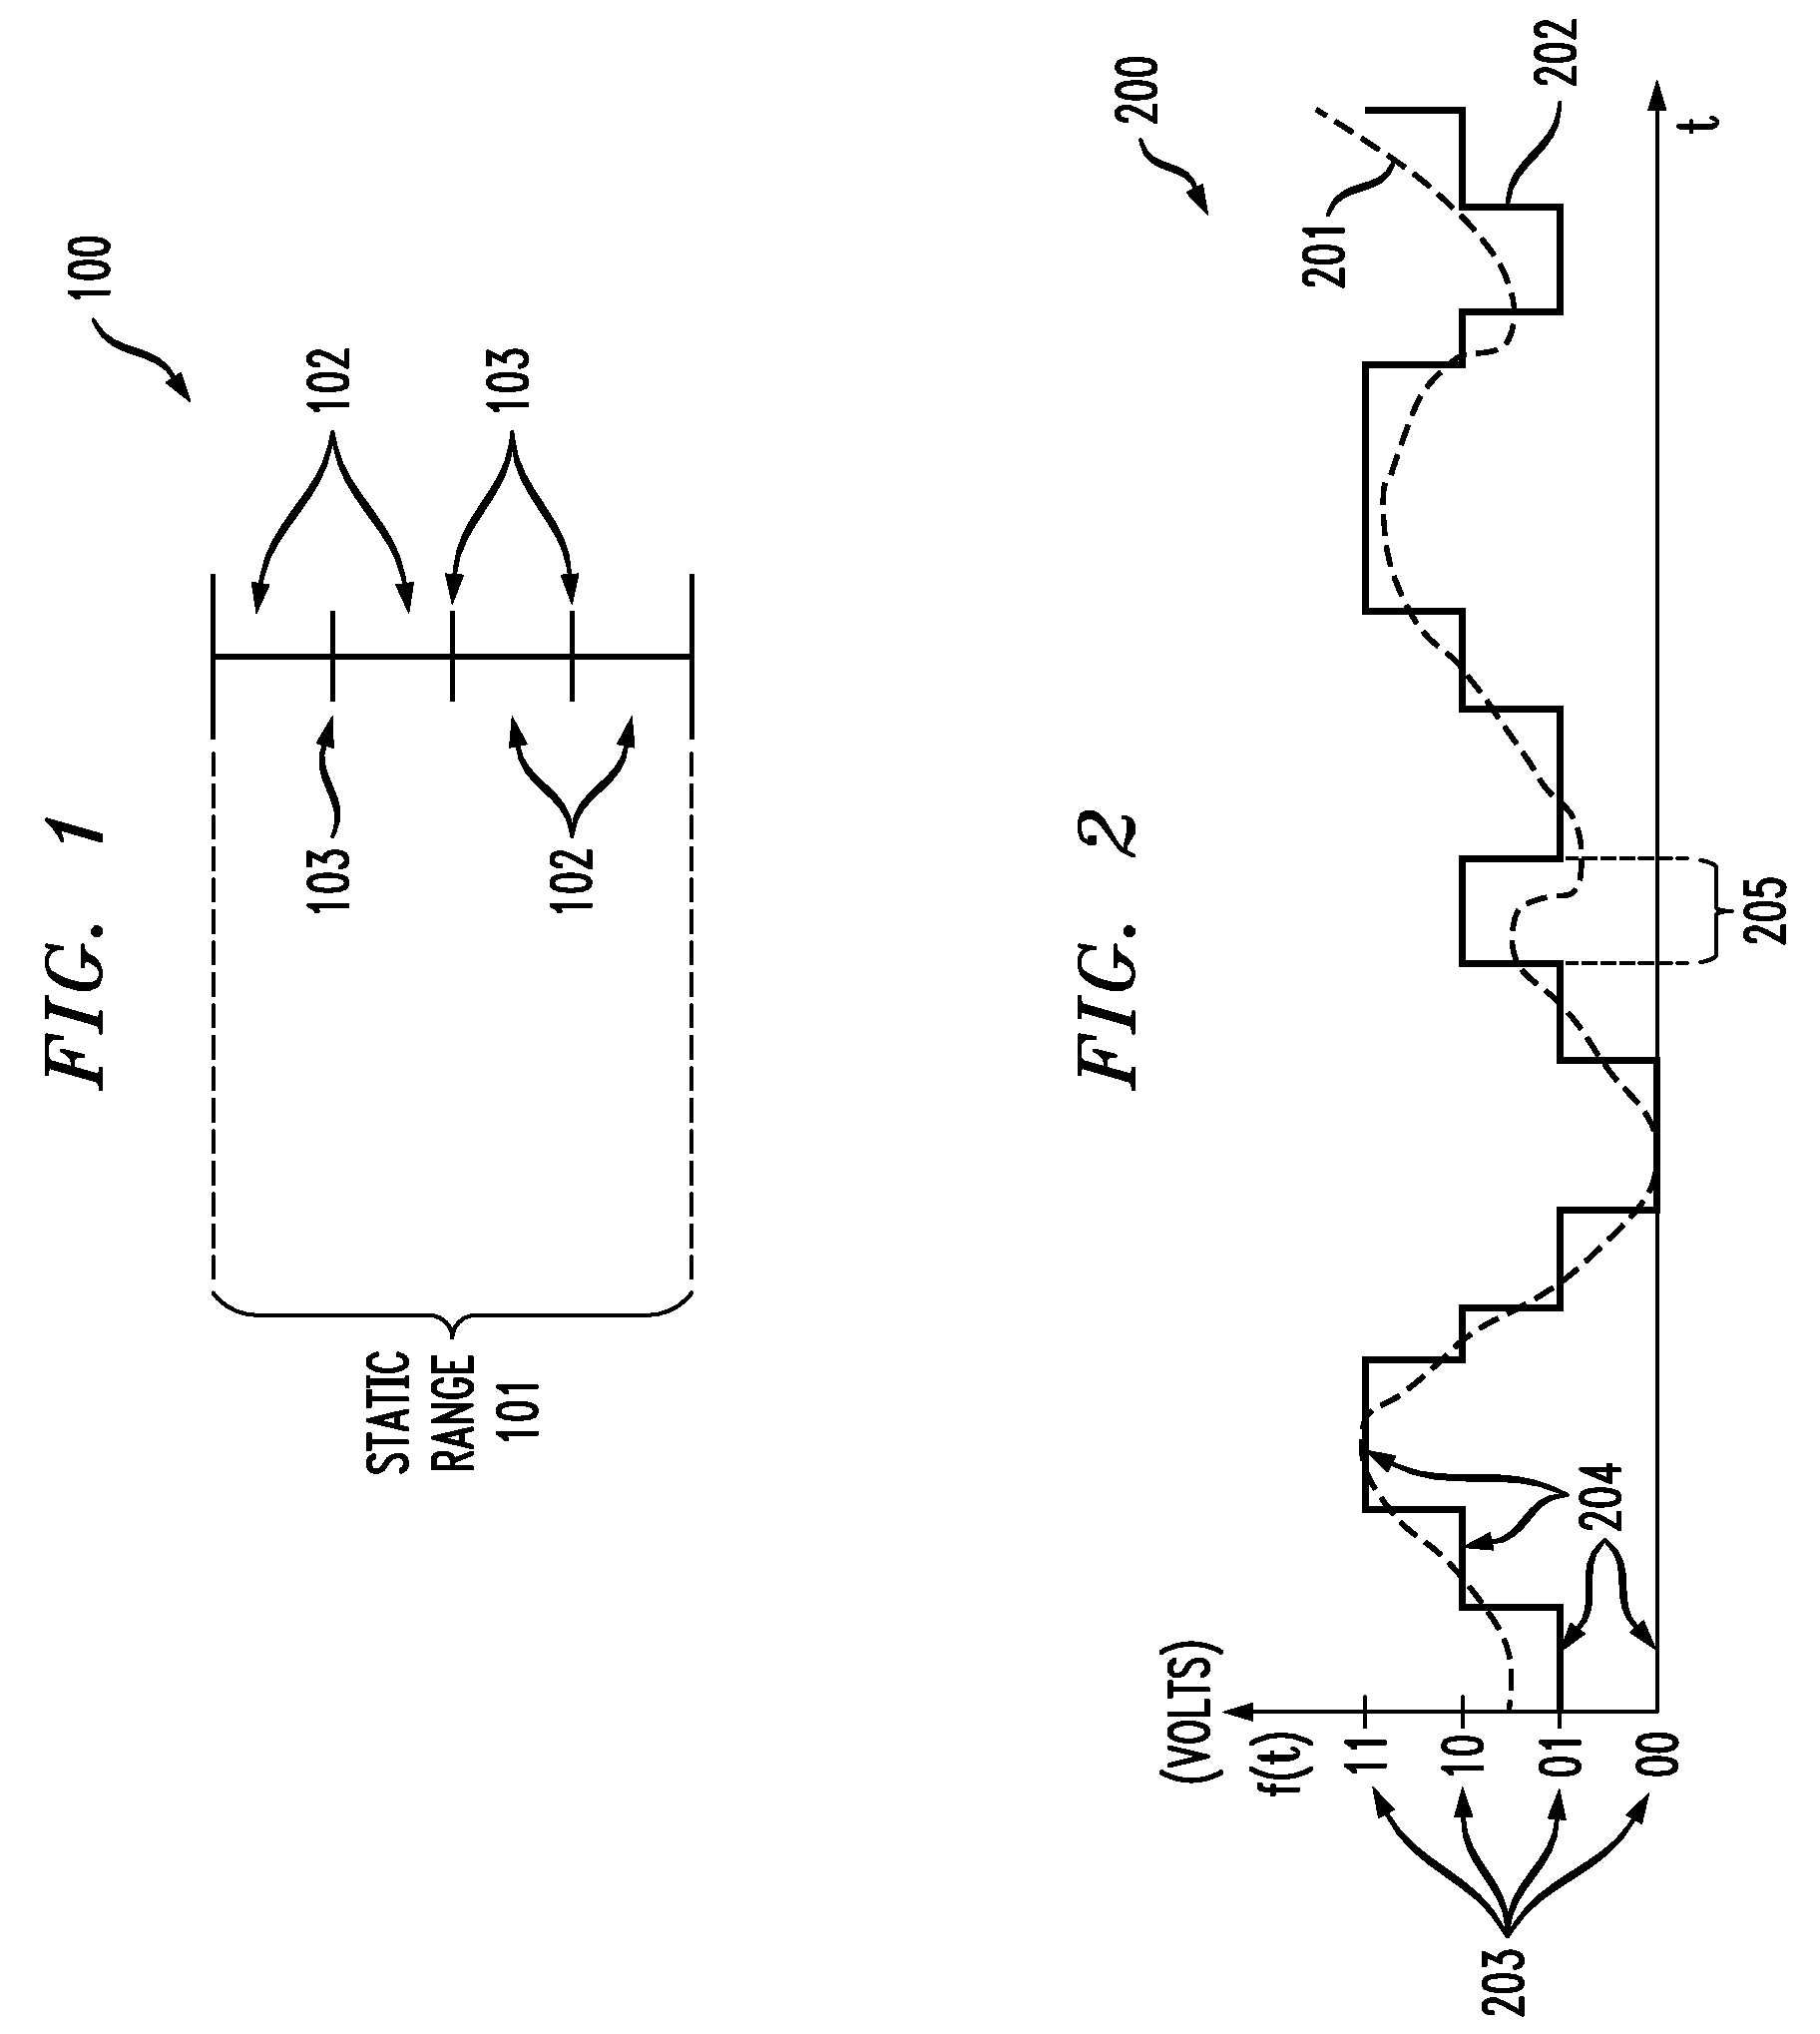 Analog-to-digital converter having reduced number of activated comparators